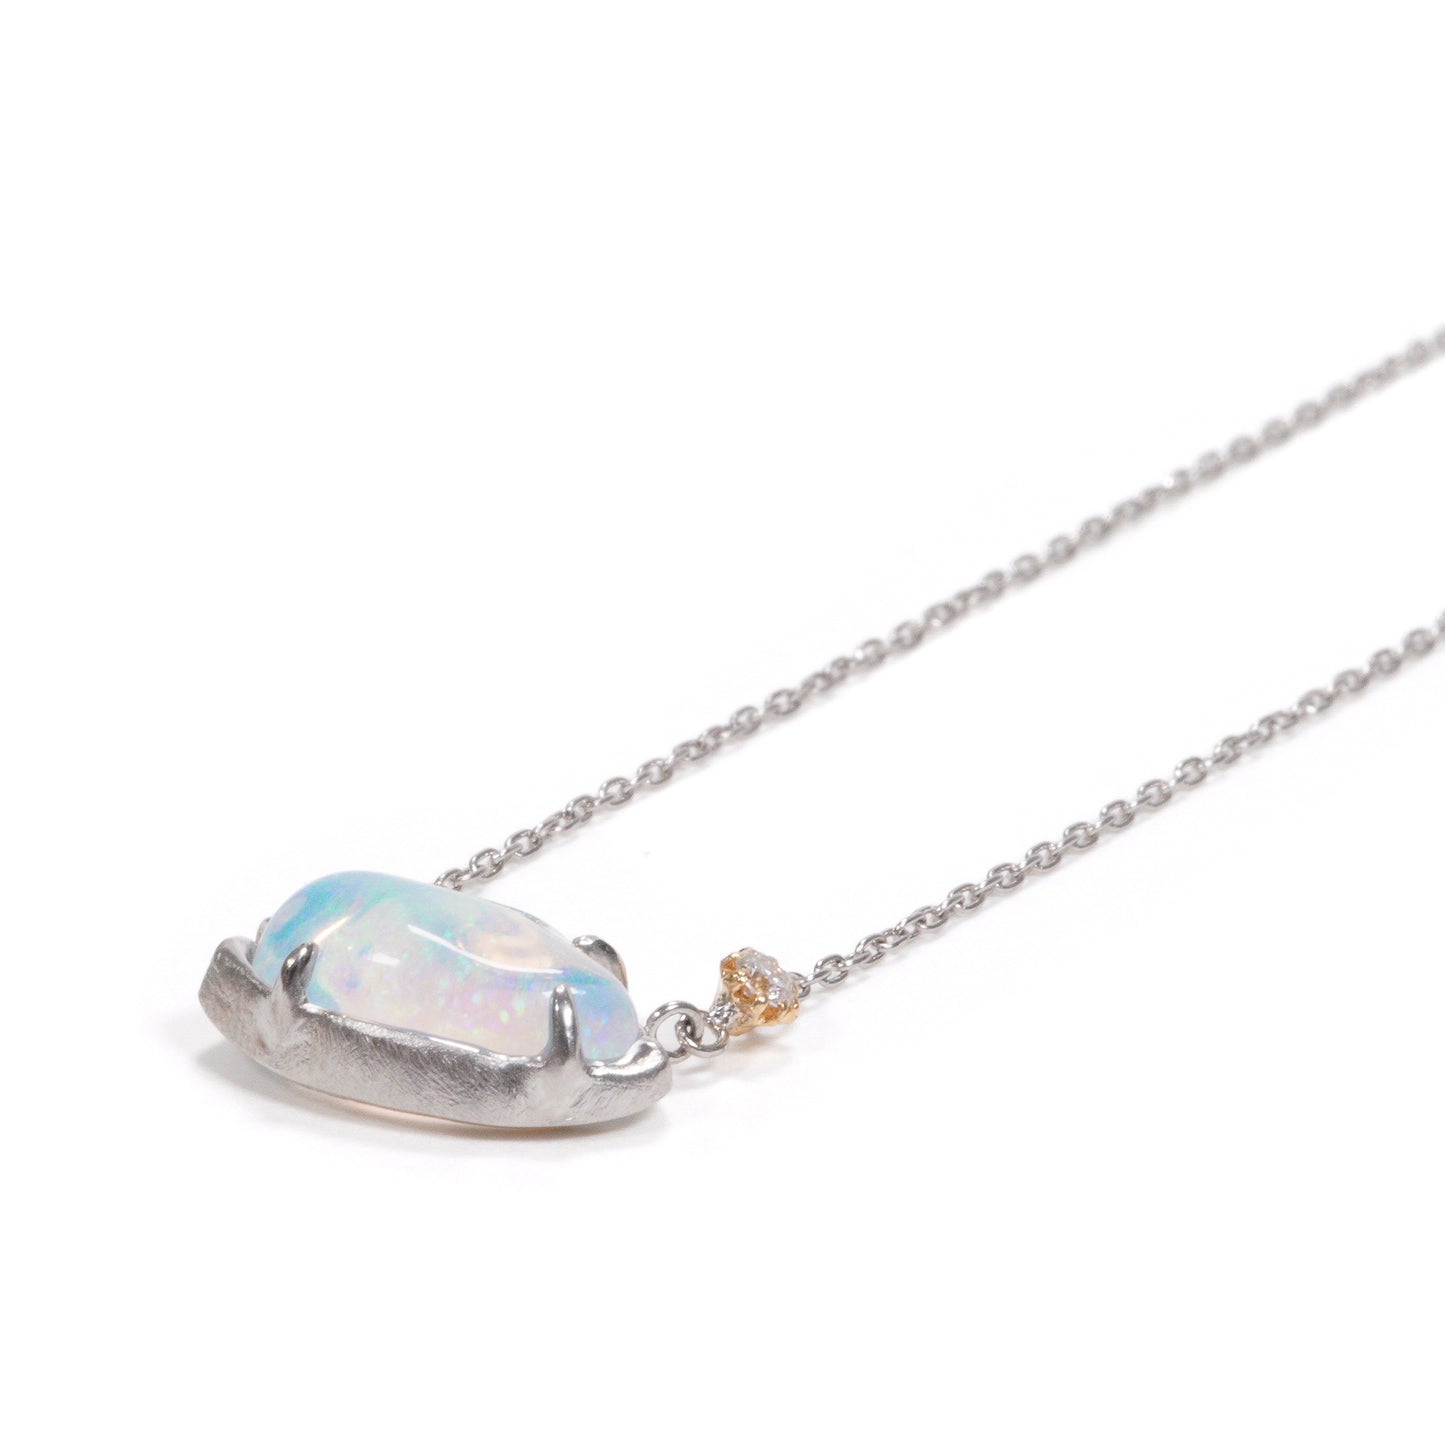 559 Necklace / Water Opal